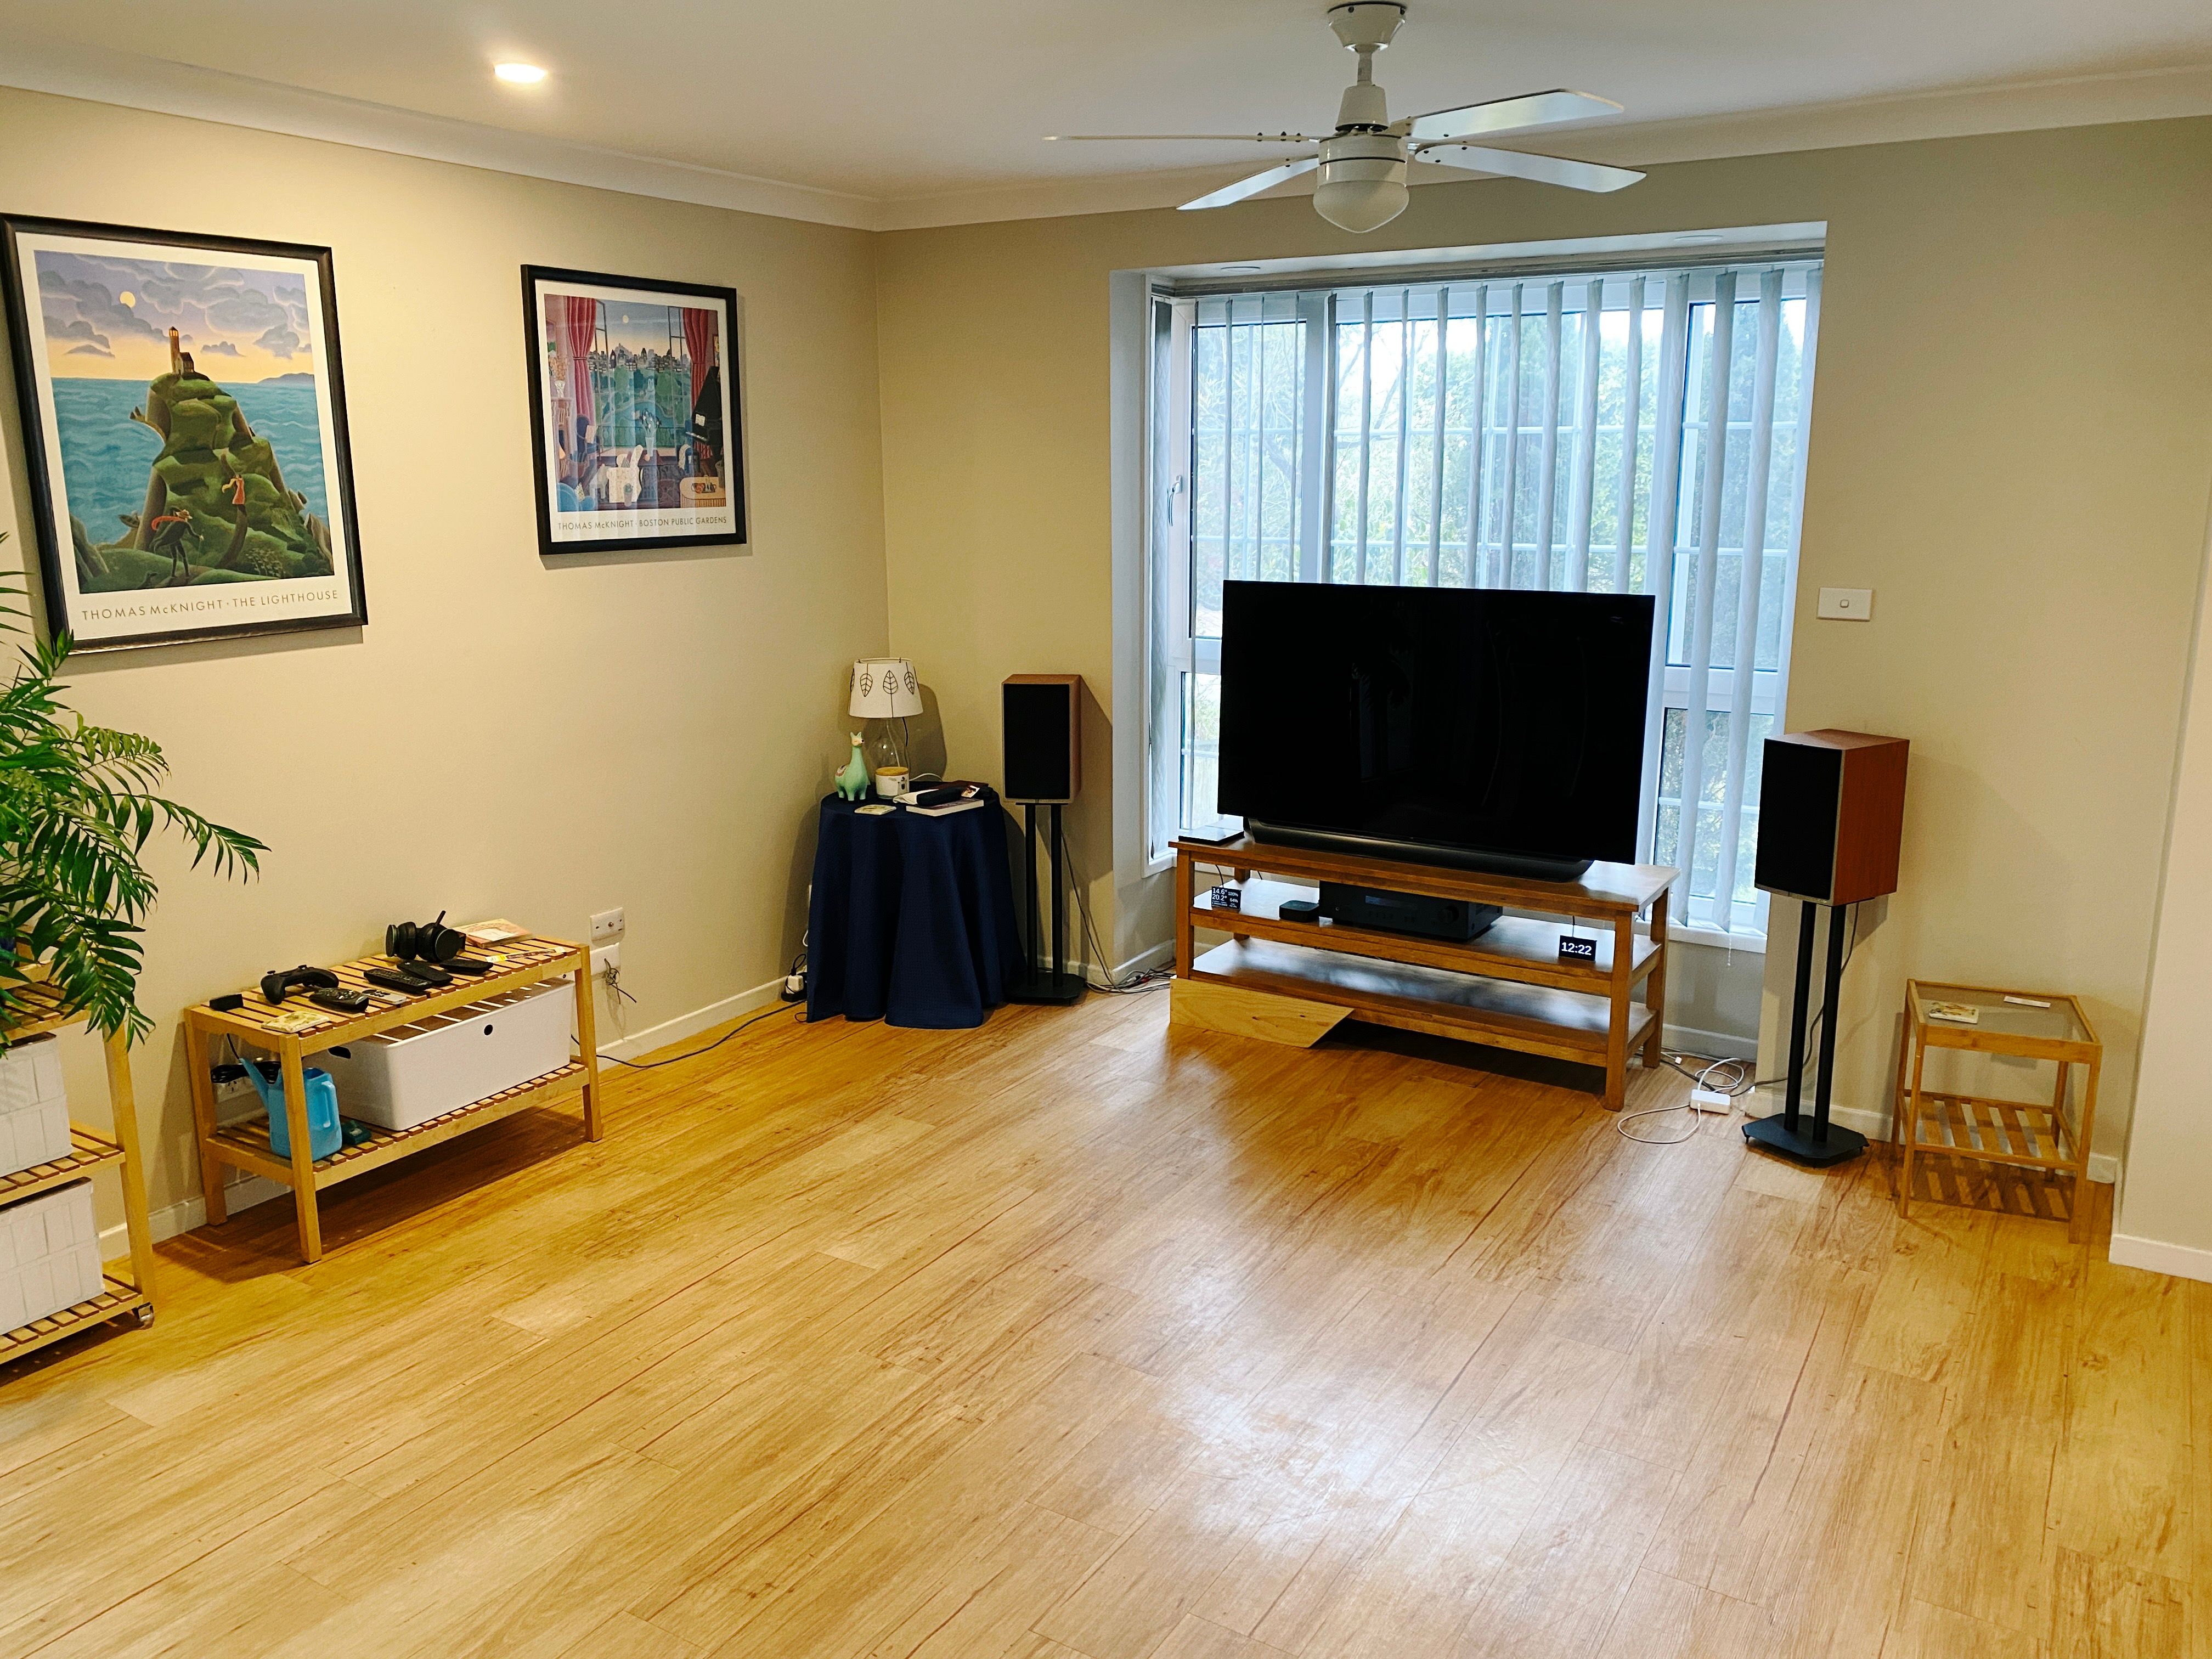 A photo of our lounge room. There's a box window towards the middle of the photo with a wooden TV stand and TV in front of it and bookshelf speakers flanking the TV, a round table with a lamp and various doodads in the corner to the left of the TV stand, plus a couple of other little side tables. The middle of the room is completely empty now due to the lack of lounge.